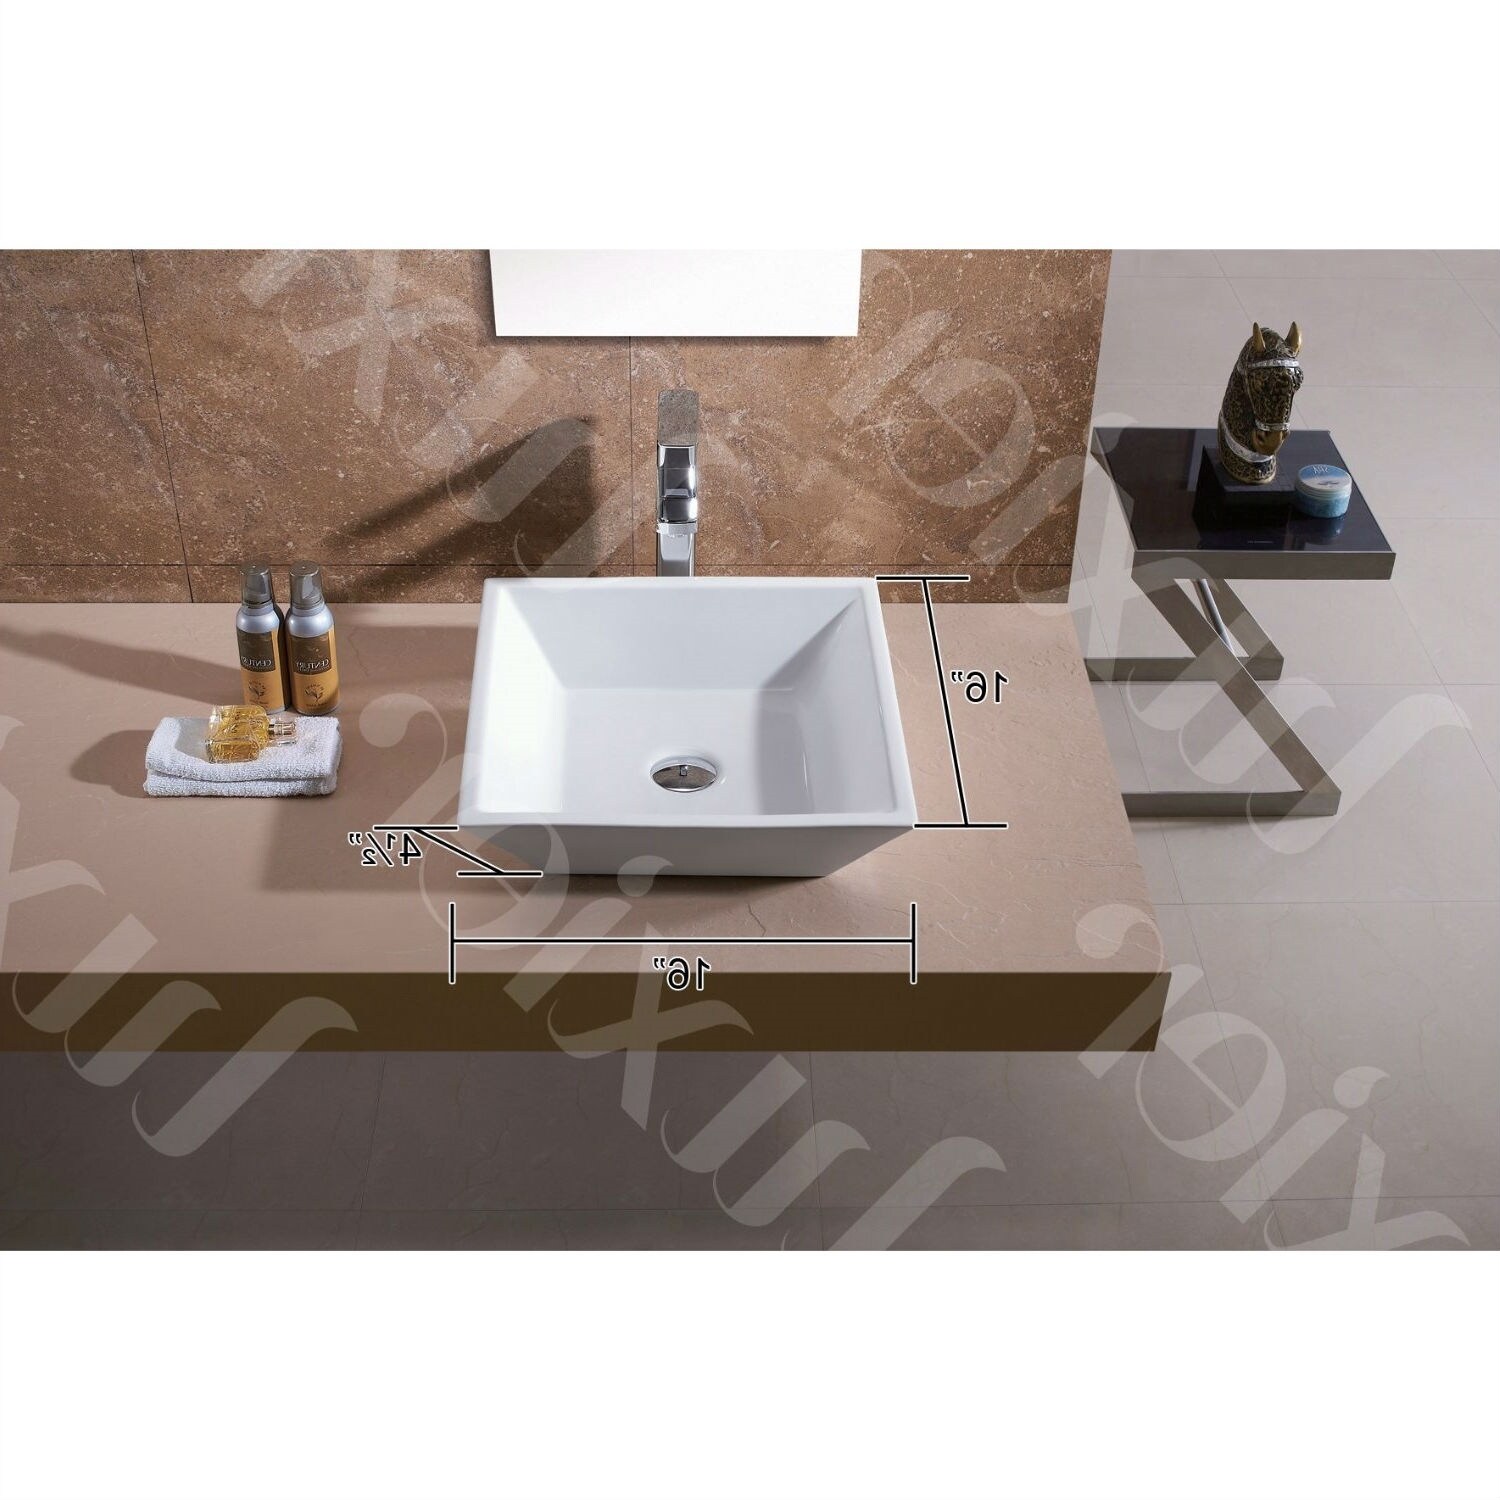 Contemporary White Ceramic Porcelain Vessel Bathroom Vanity Sink - 16 x 16-inch - 16 x 4.5 x 16 inches